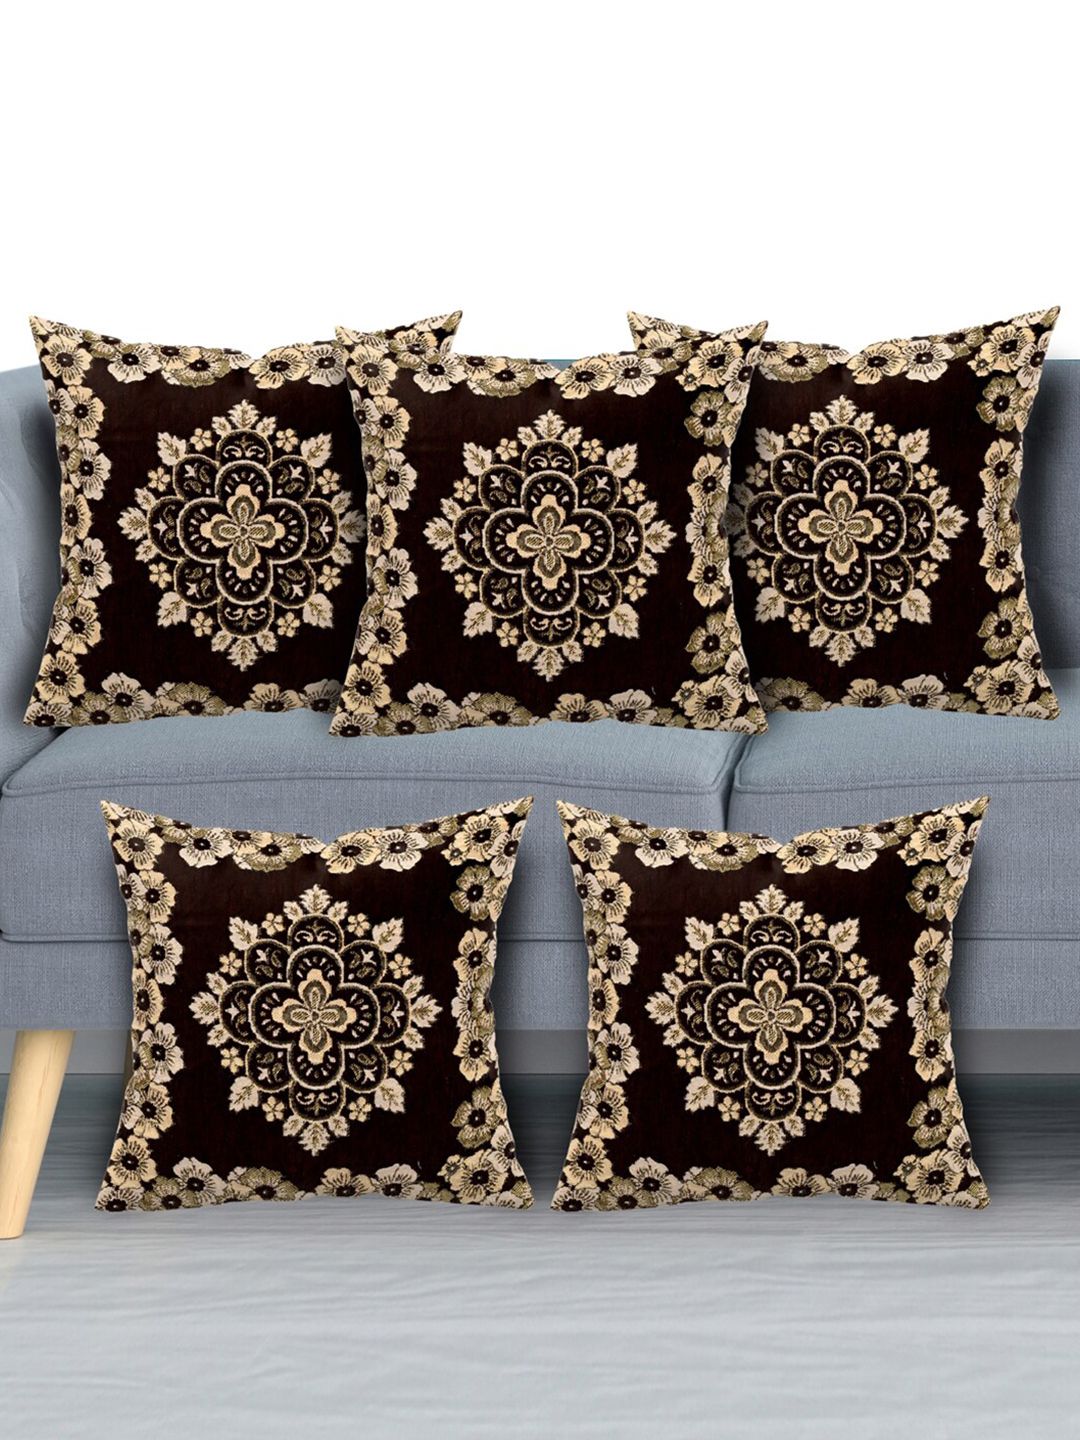 Kuber Industries Brown & Beige Set of 5 Floral Velvet Square Cushion Covers Price in India